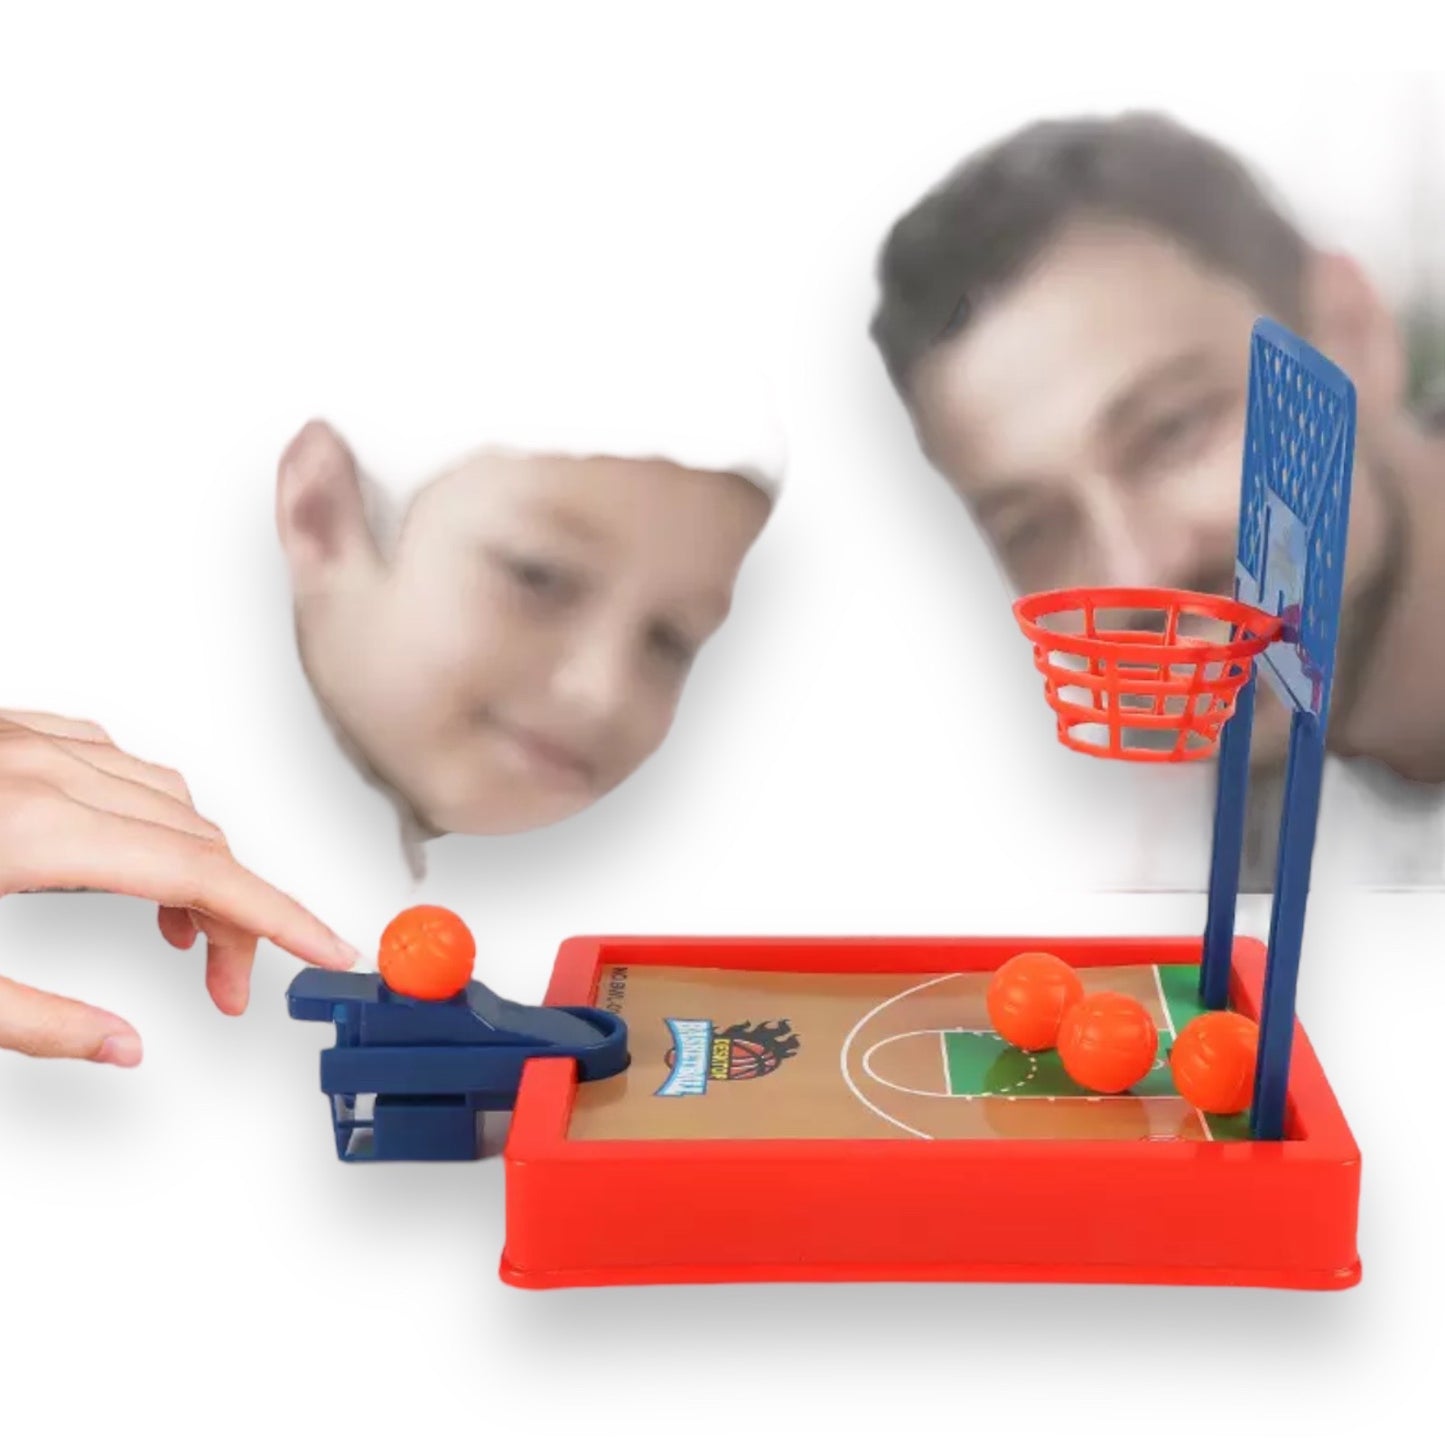 Basketball Kids Game - Interactive Desktop Board Game for Endless Fun and Competition